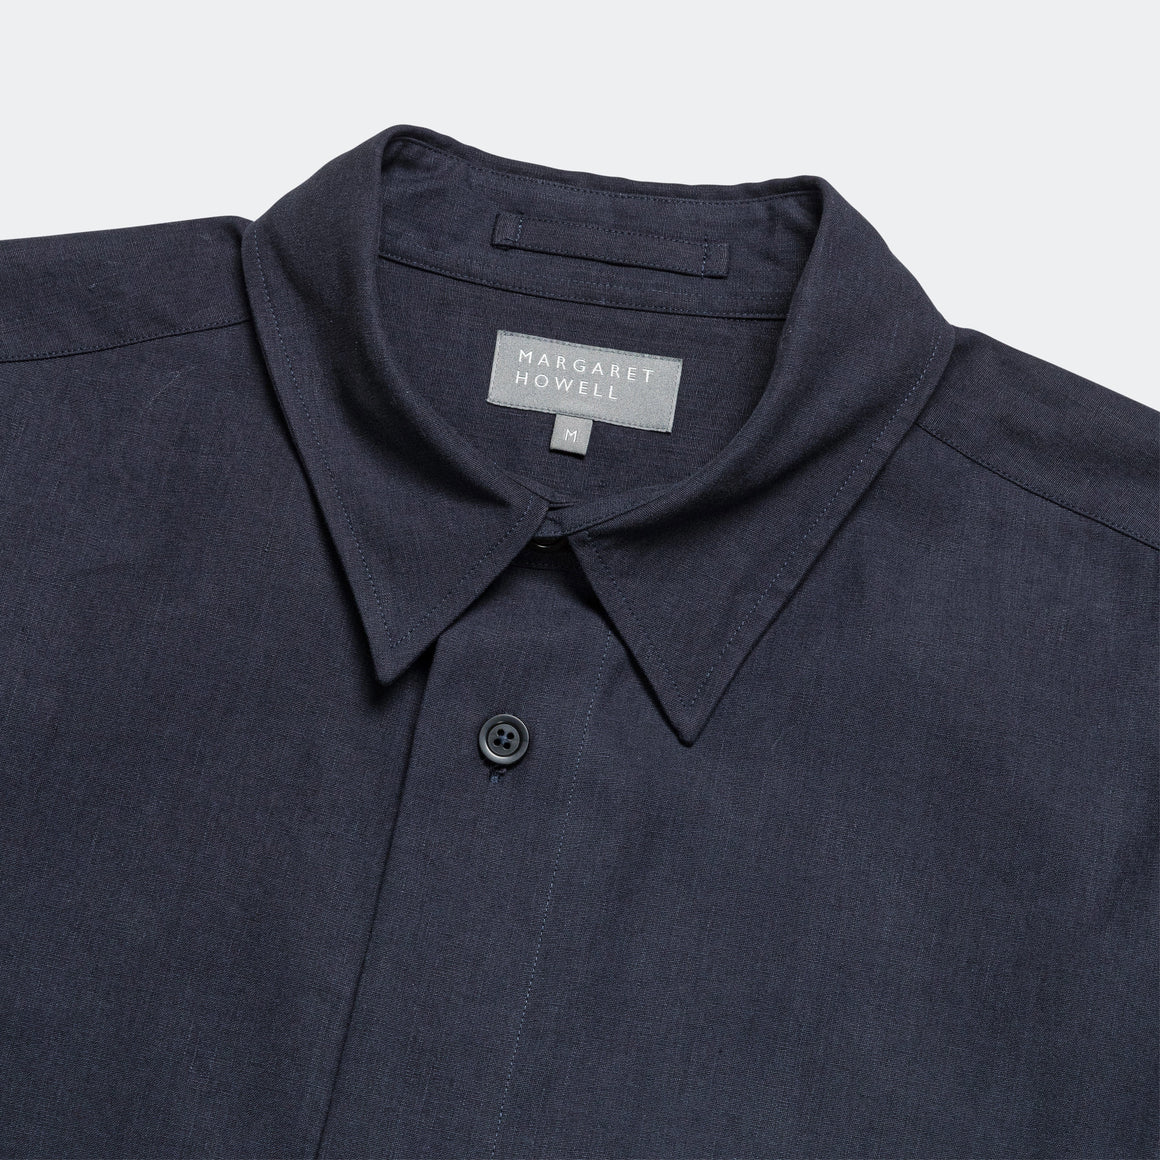 Margaret Howell - Minimal Boxy Shirt - Ink Heavy Cotton Linen Poplin - UP THERE